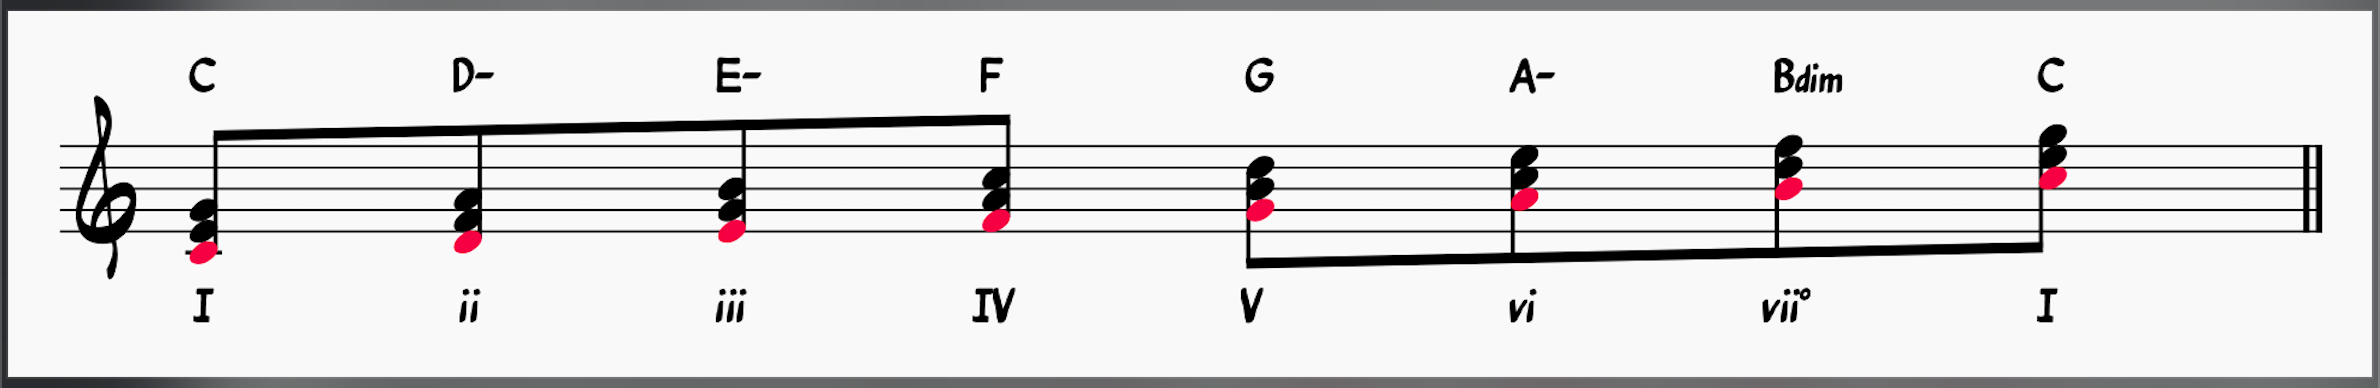 Diatonic Chords in the Key of C major